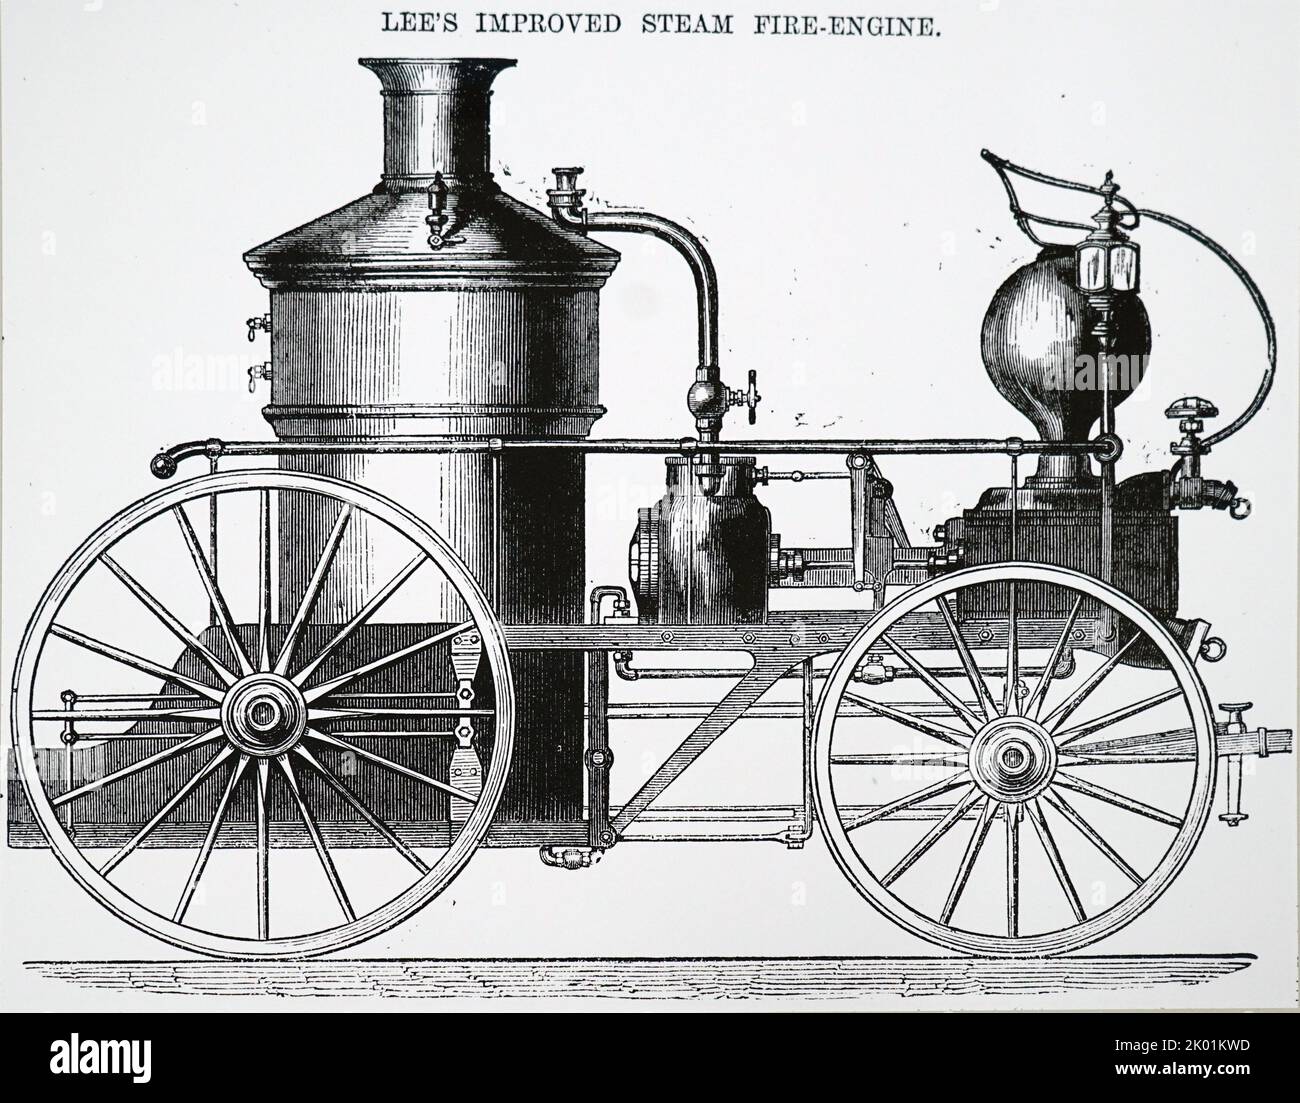 Steam fire engine patented by Wellington Lee and Larned, New York, and built by Messrs Easton, Amos & Sons. London, 1862. Stock Photo